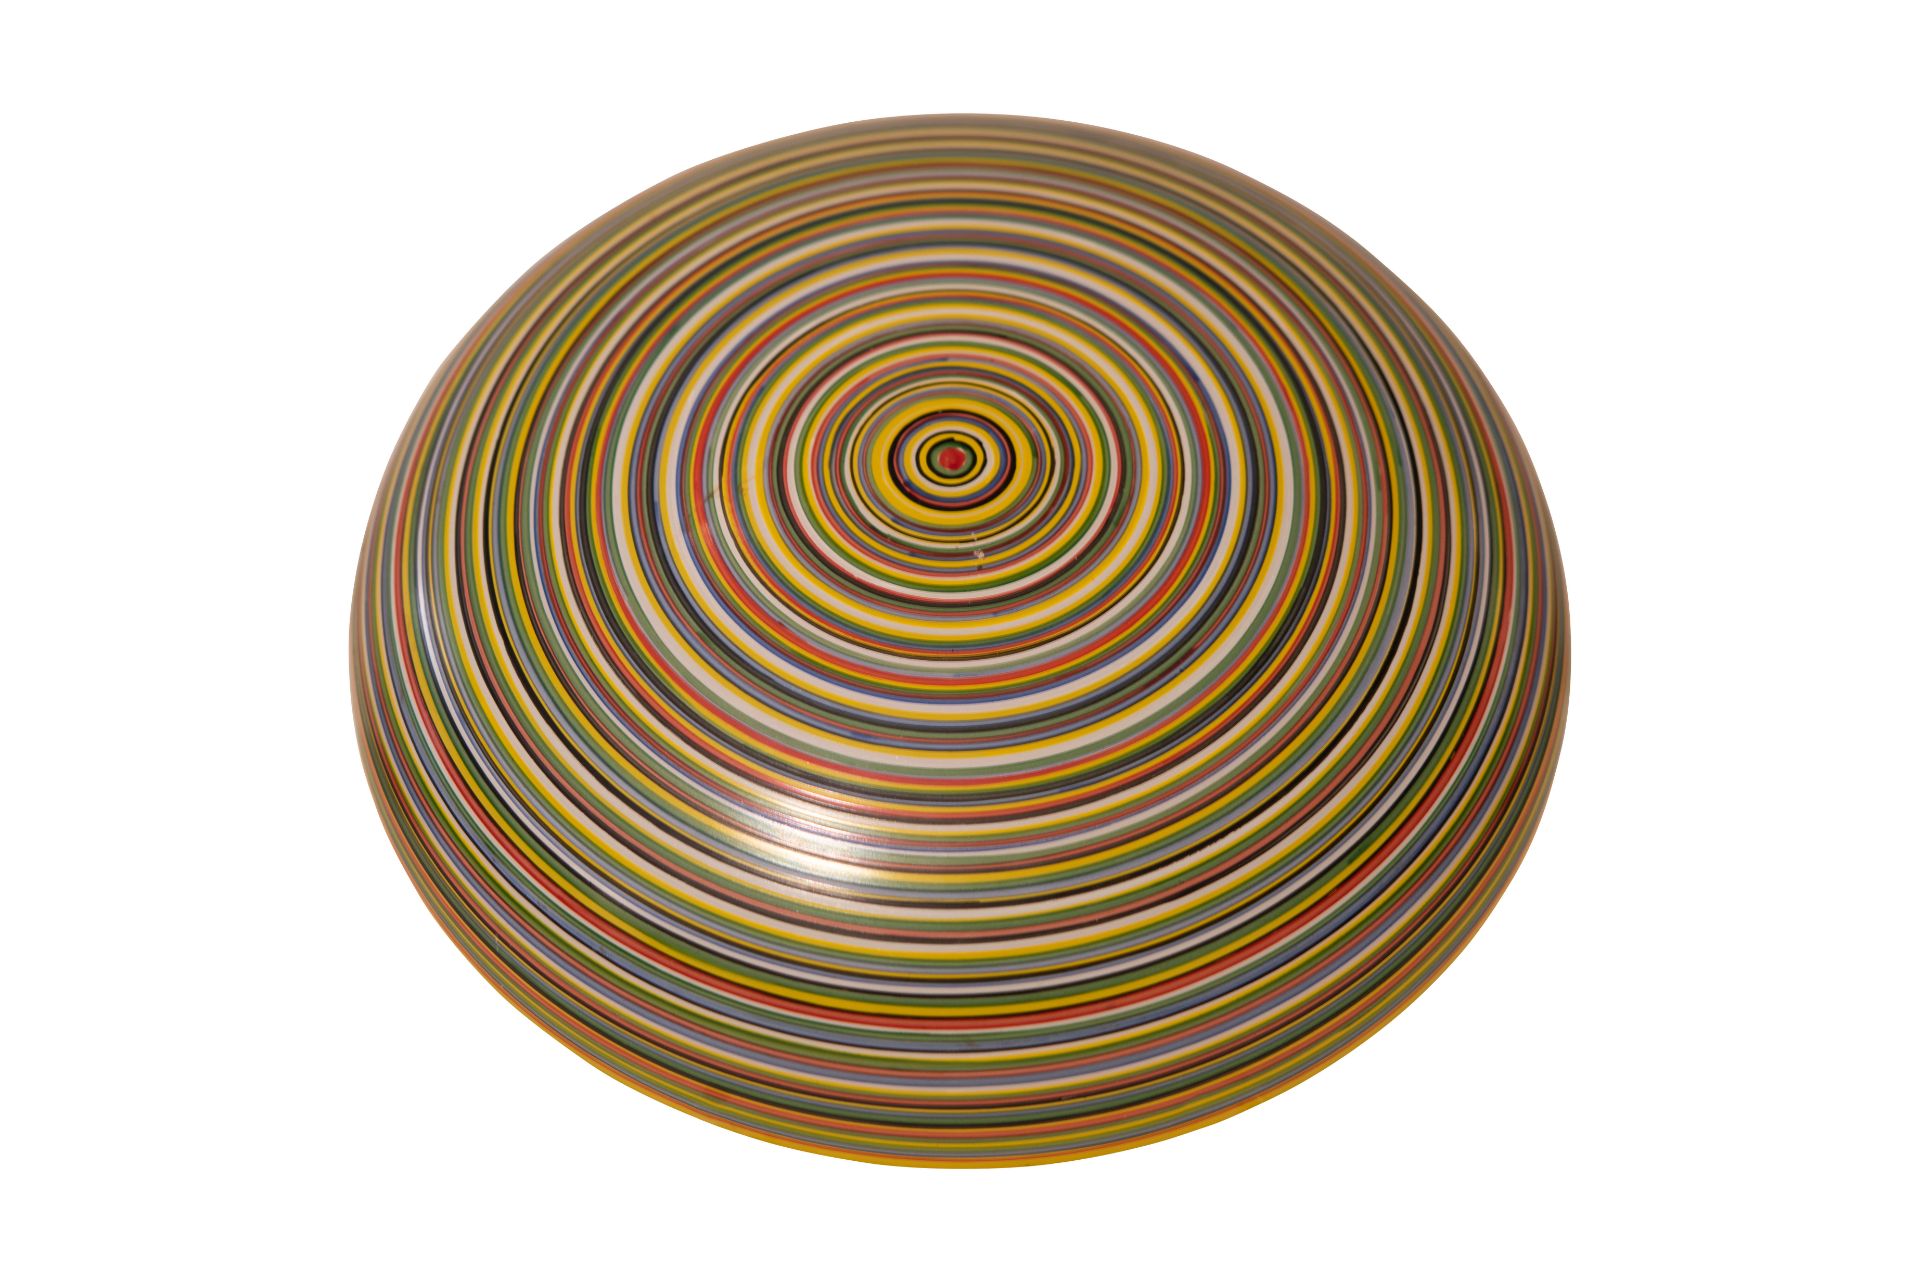 Glas Schale bunt bemalt | Glass Bowl Painted with Colorful Circles - Image 3 of 5